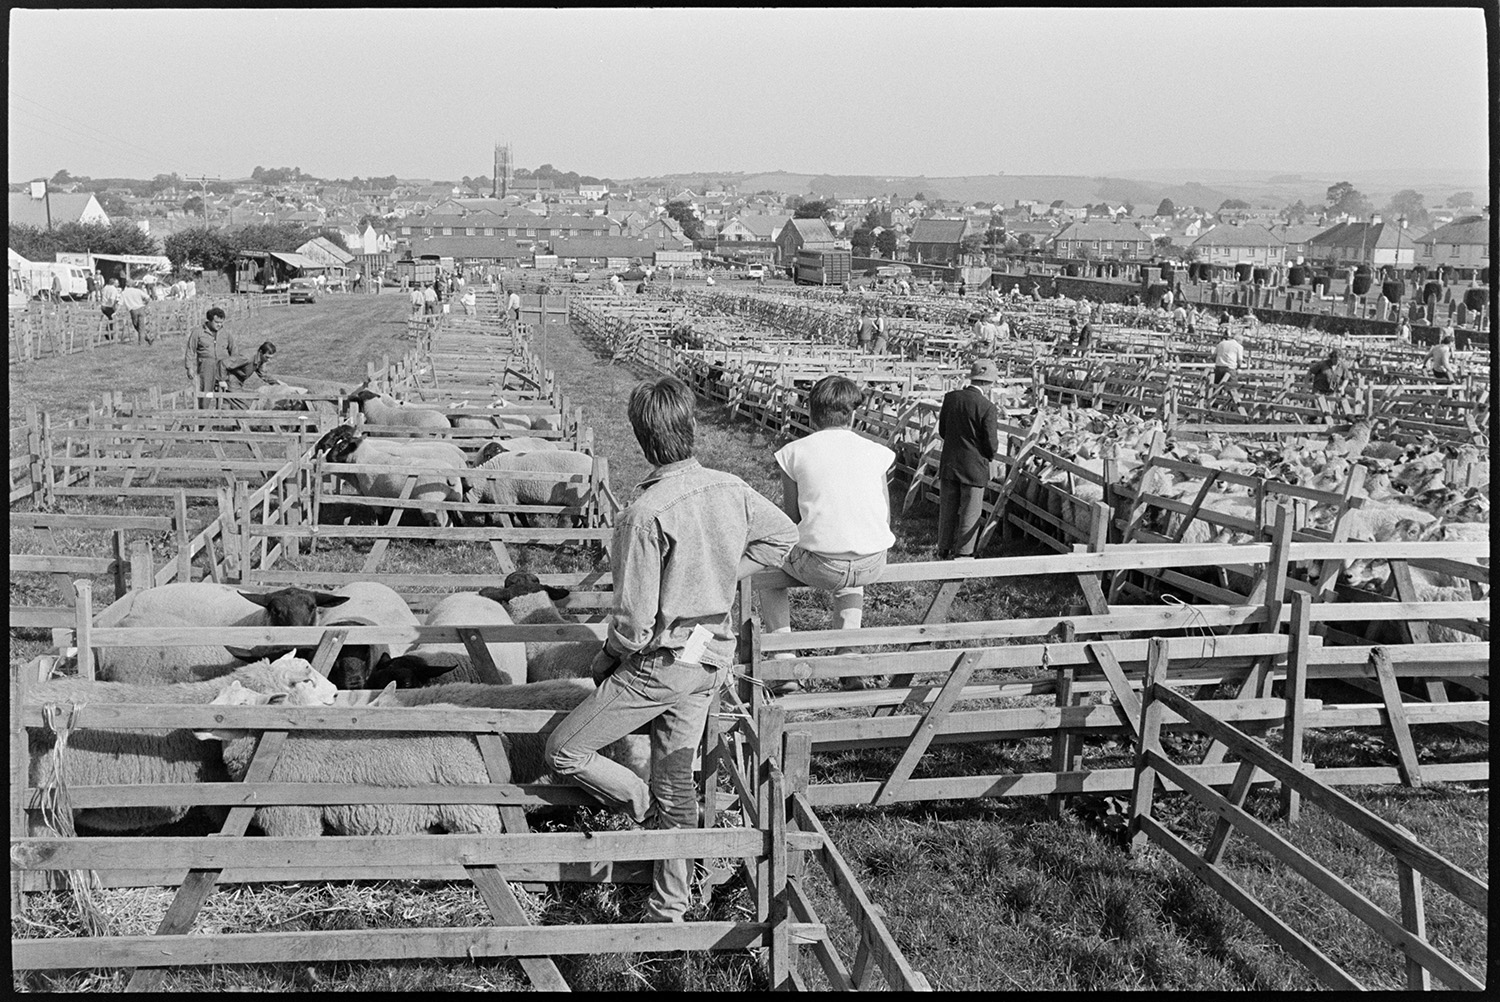 View over pens at sheep fair. <br />
[People looking at sheep in wooden pens at South Molton Sheep Fair. The town of South Molton, including the church tower, is visible in the background.]